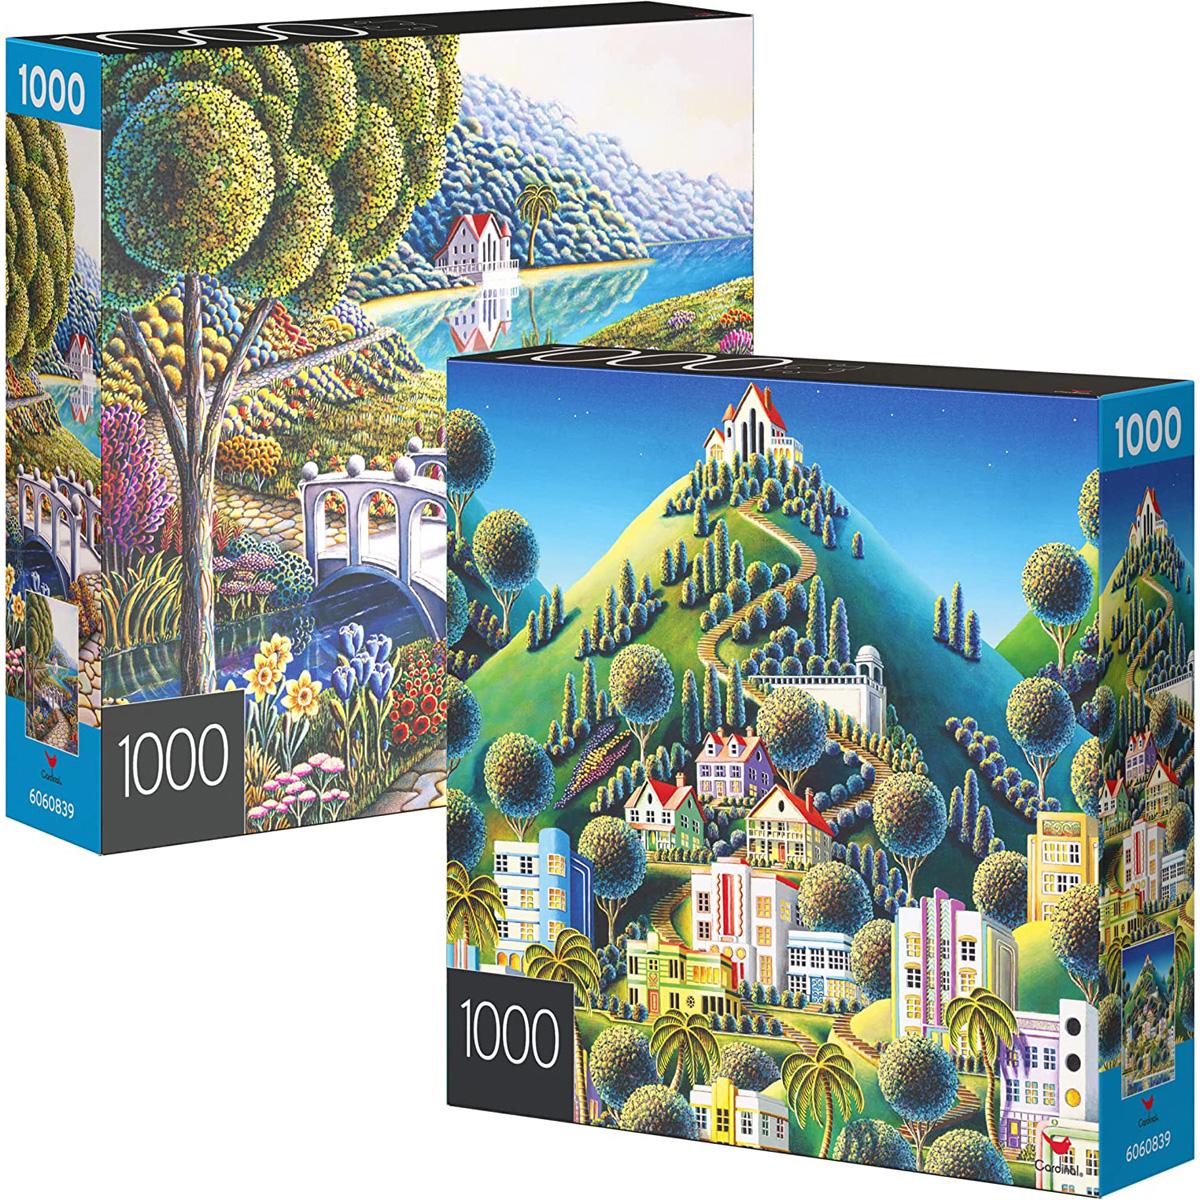 Spin Master Daffodils and Hidden Village Jigsaw Puzzles for $6.62